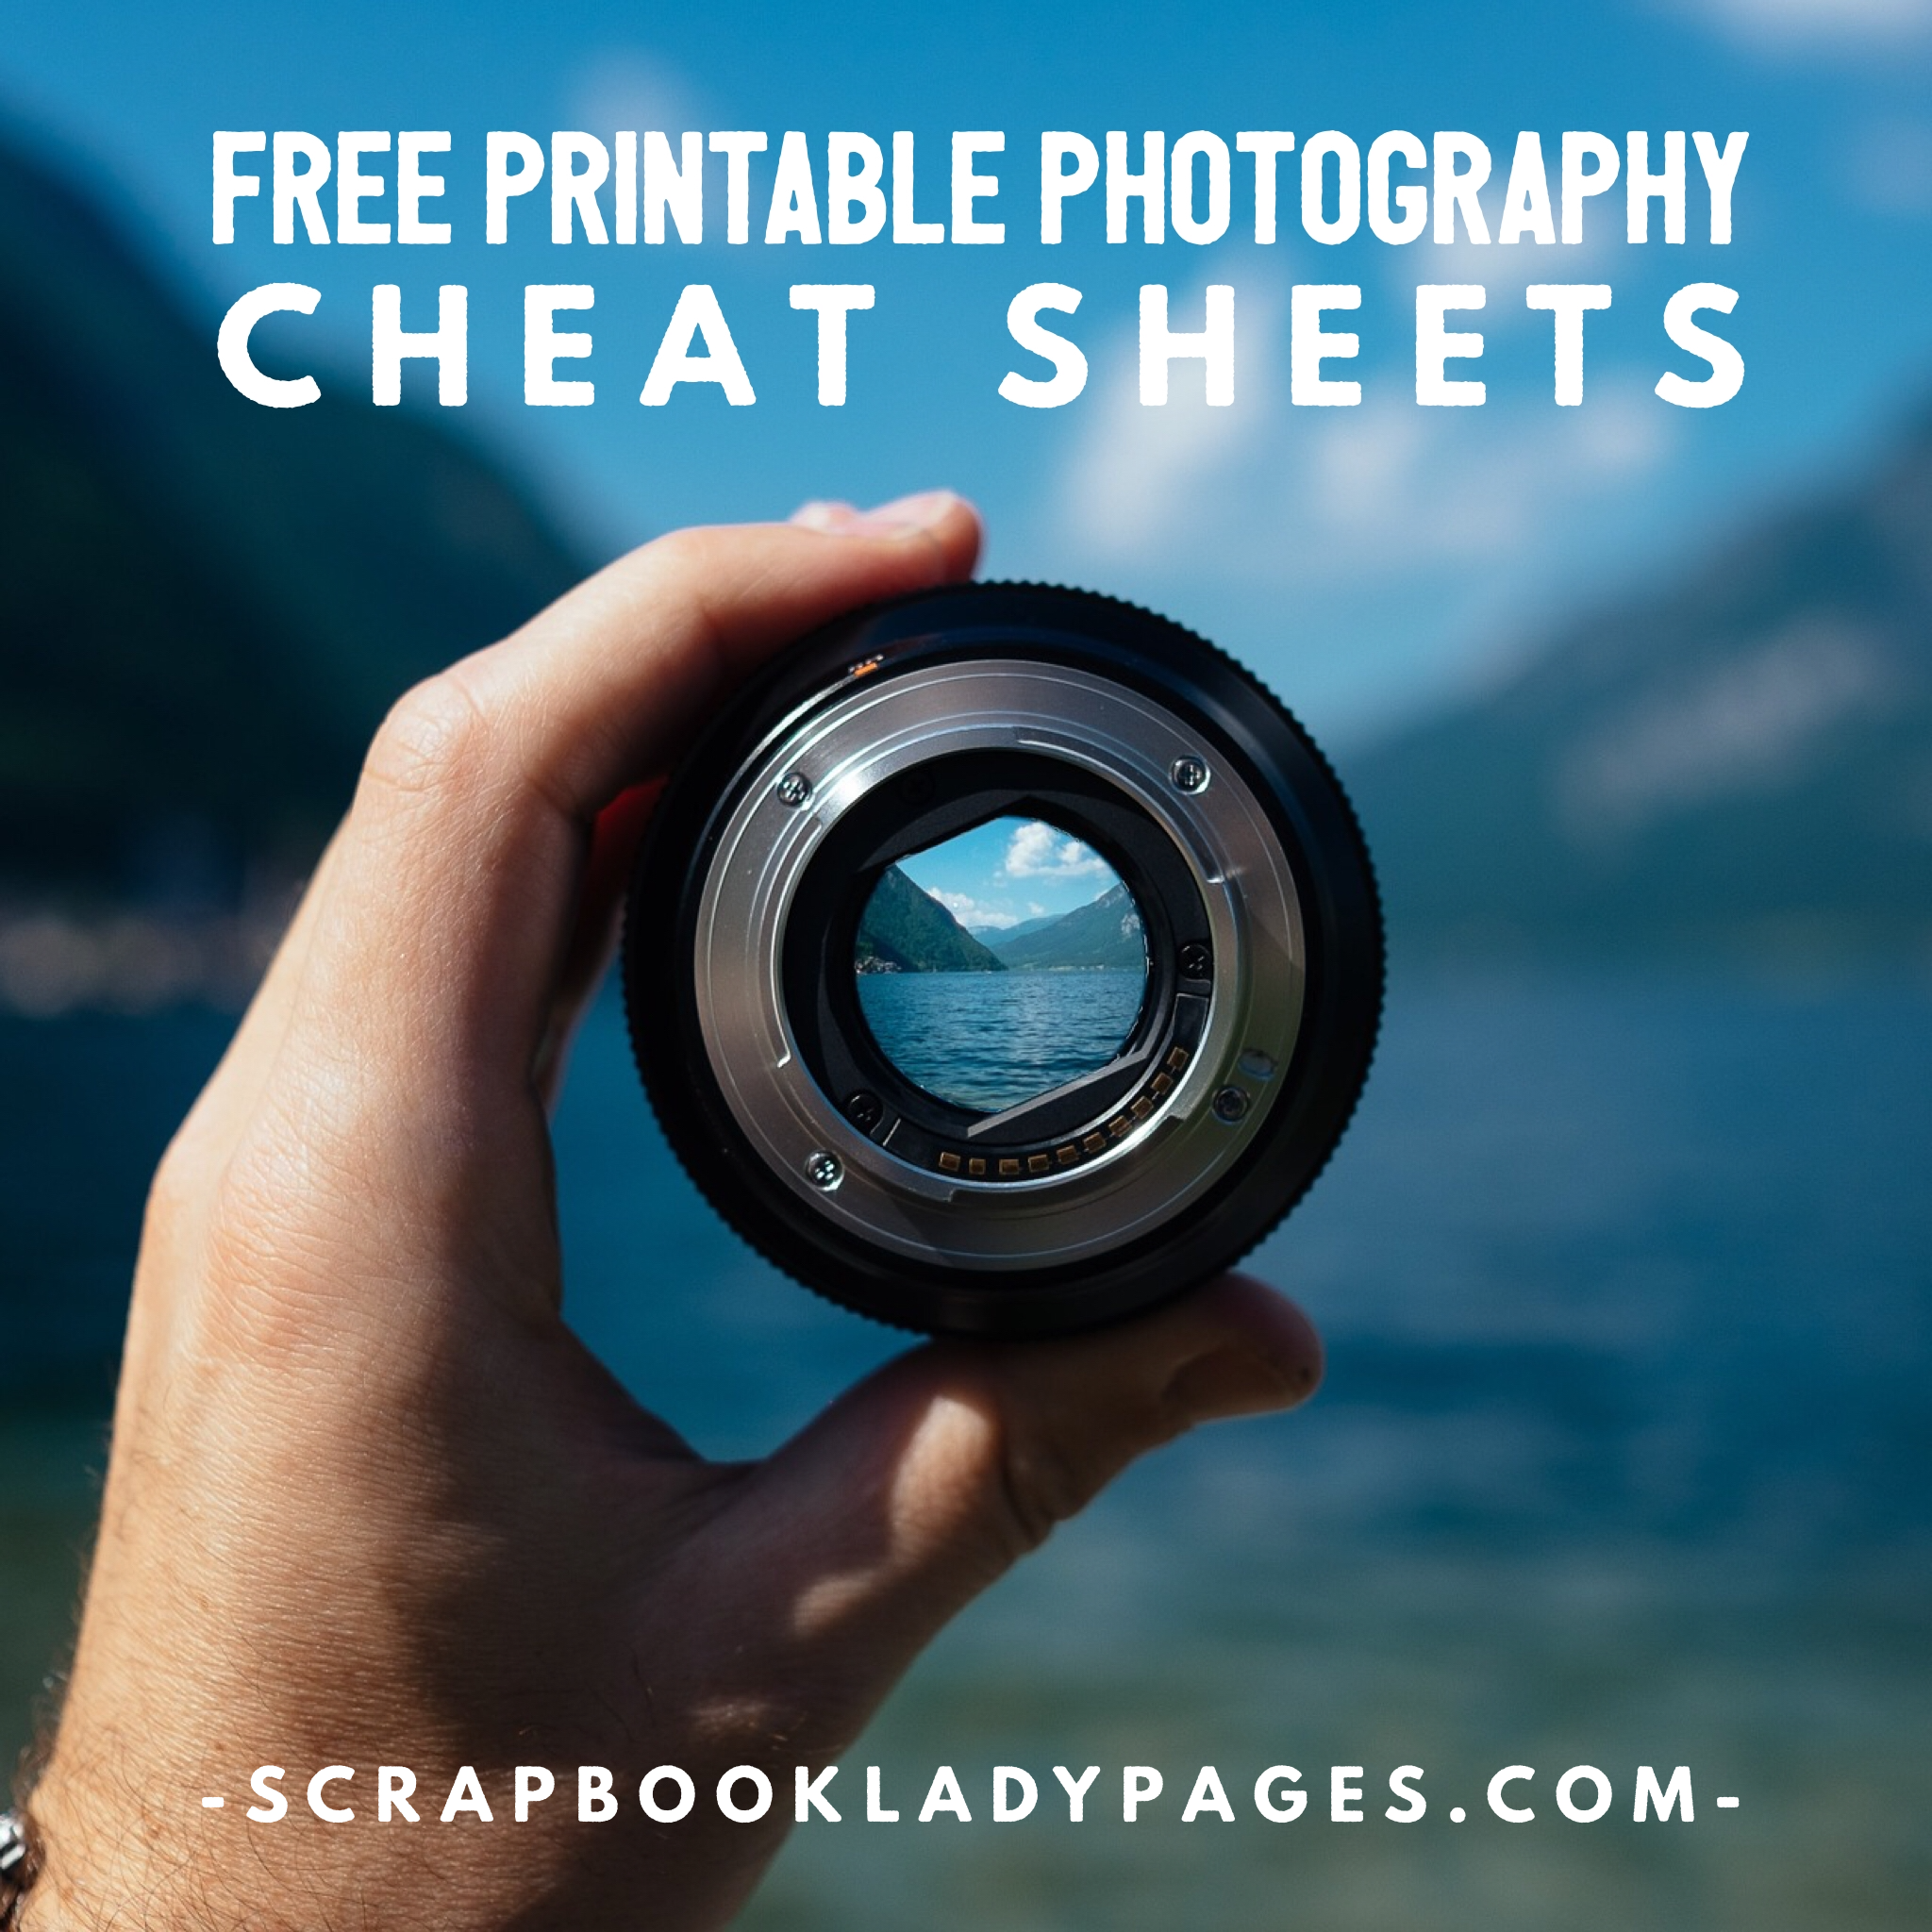 free-printable-photography-cheat-sheets-prntbl